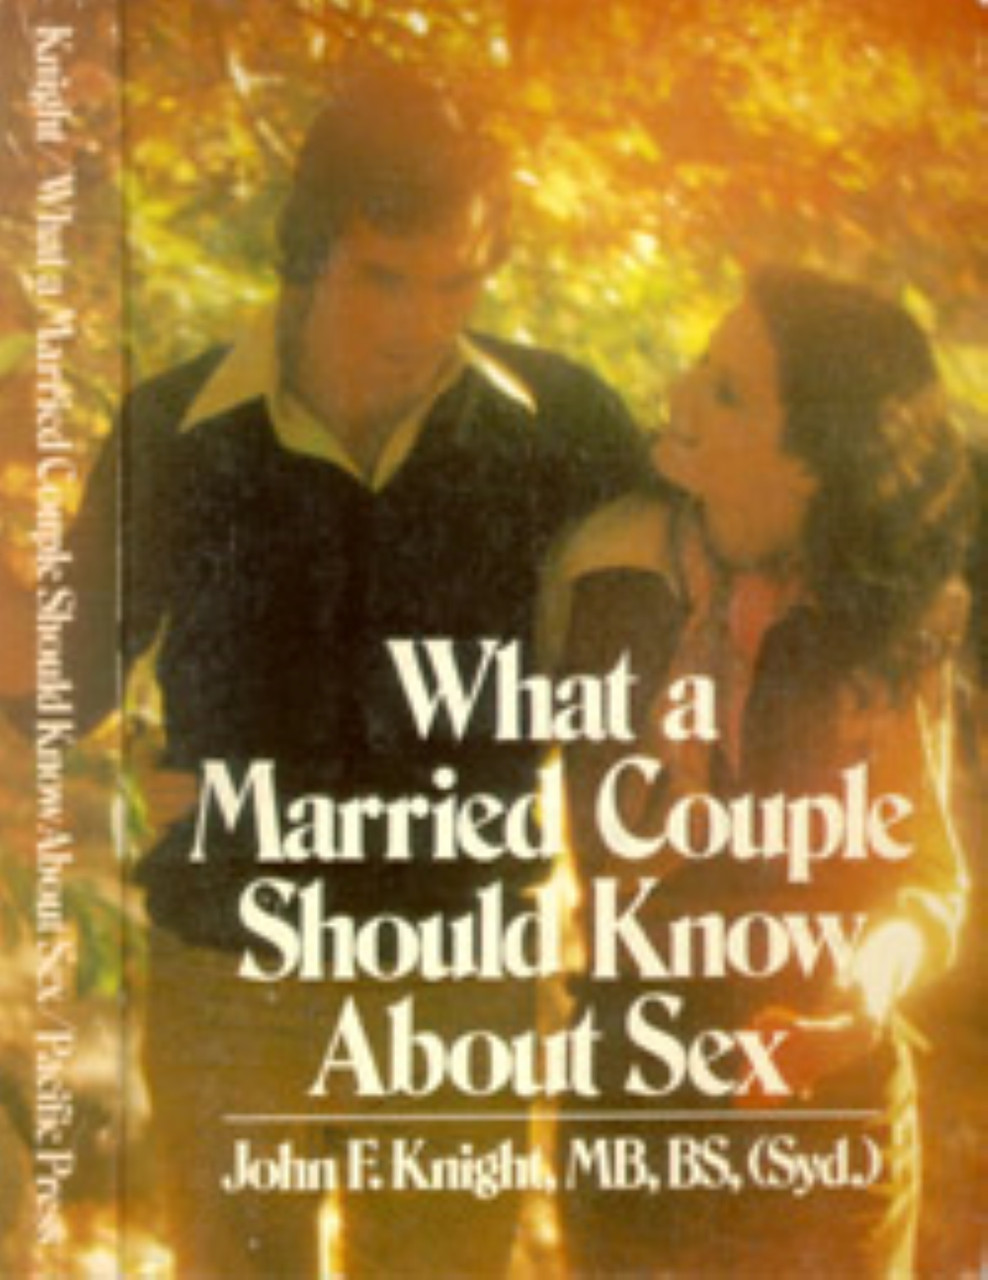 What a Married Couple Should Know About Sex / Knight, John F image